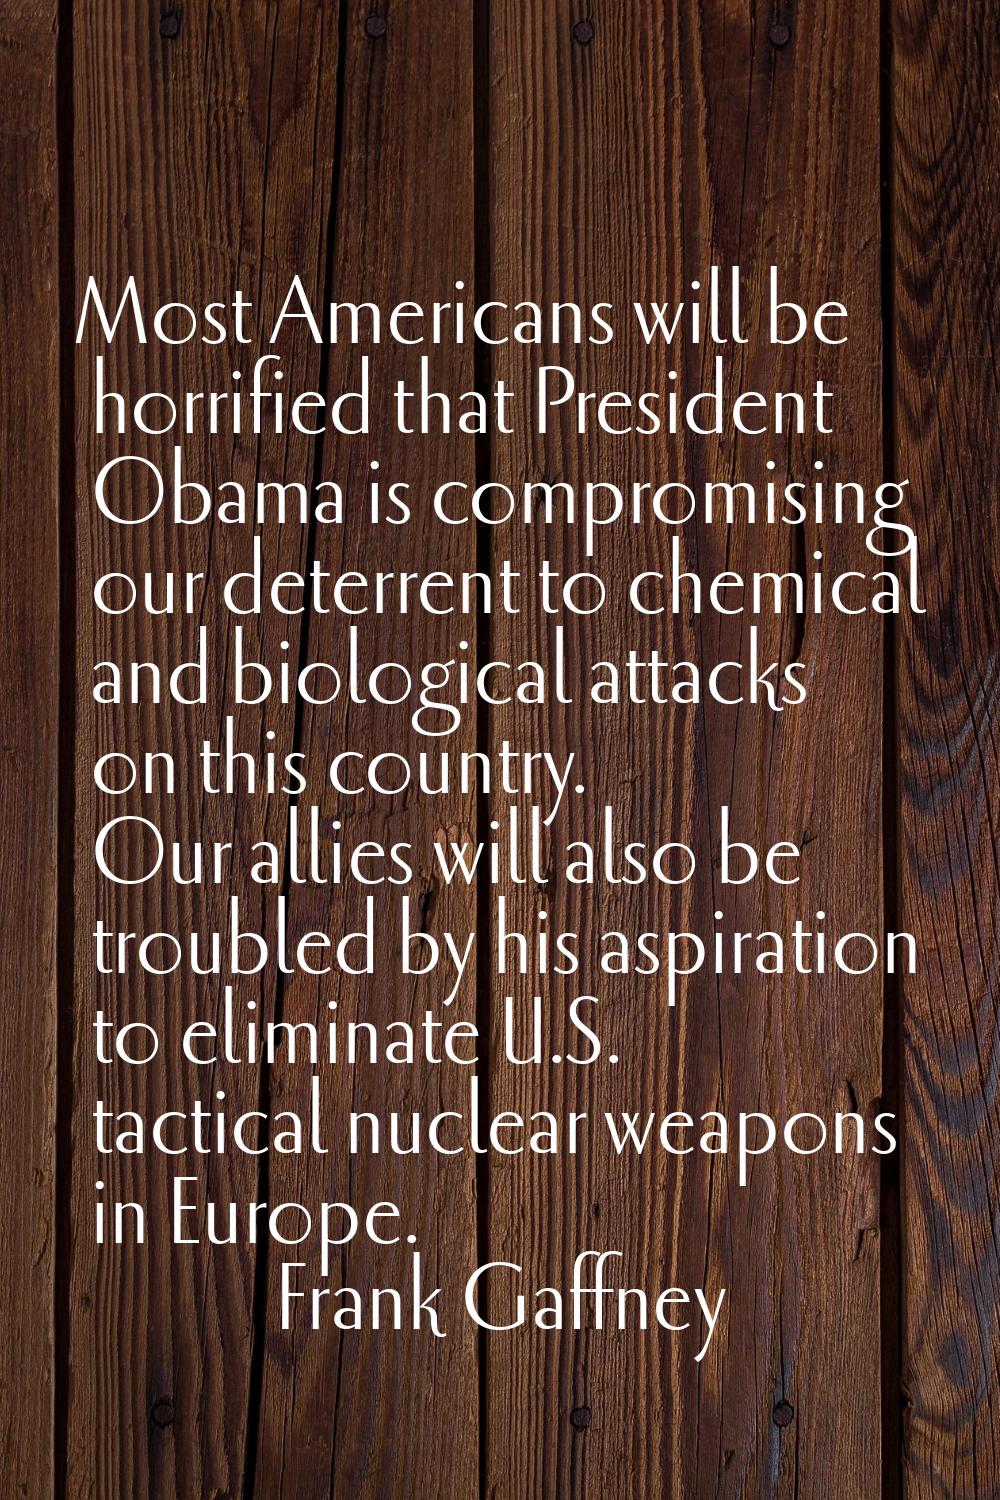 Most Americans will be horrified that President Obama is compromising our deterrent to chemical and